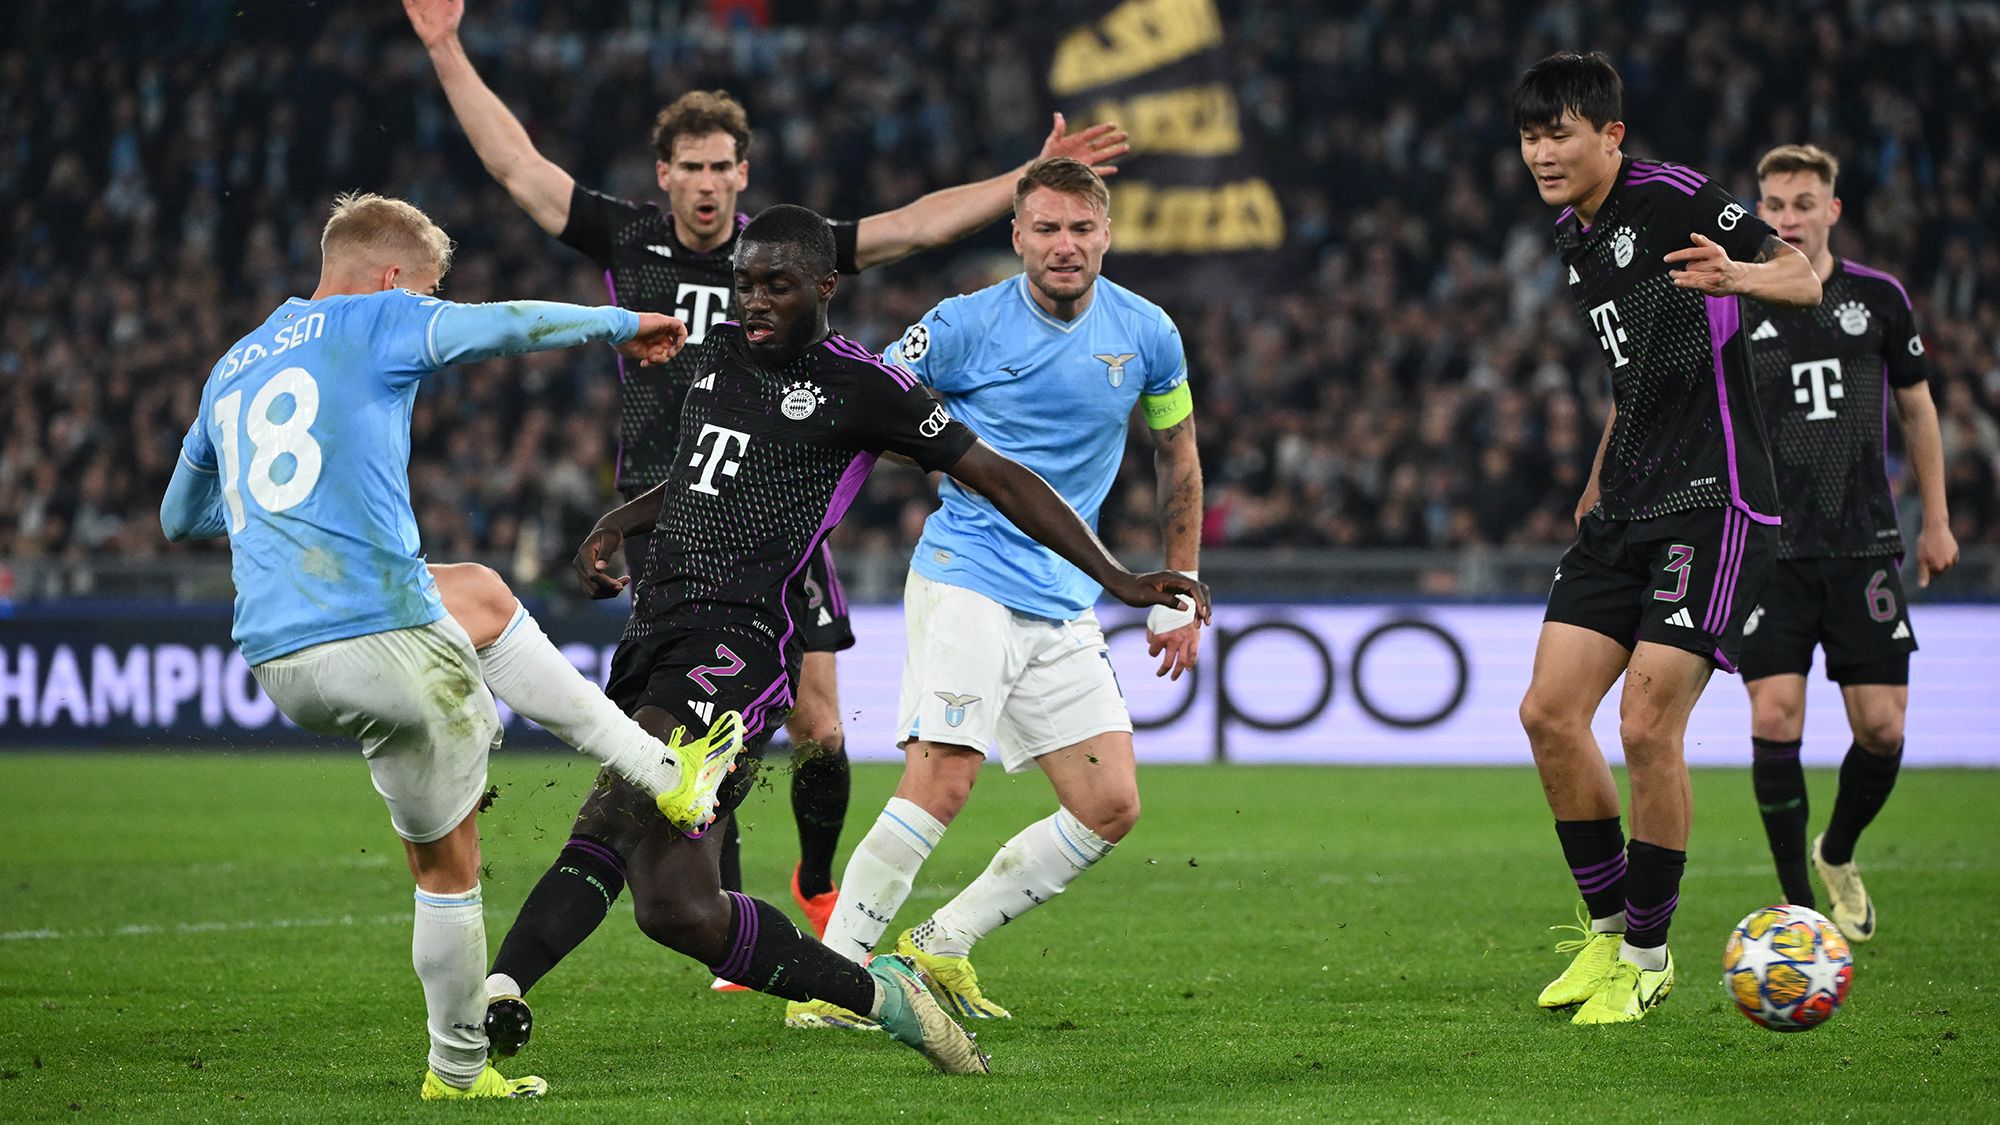 Upamecano was sent off for a challenge in the second half against Lazio.